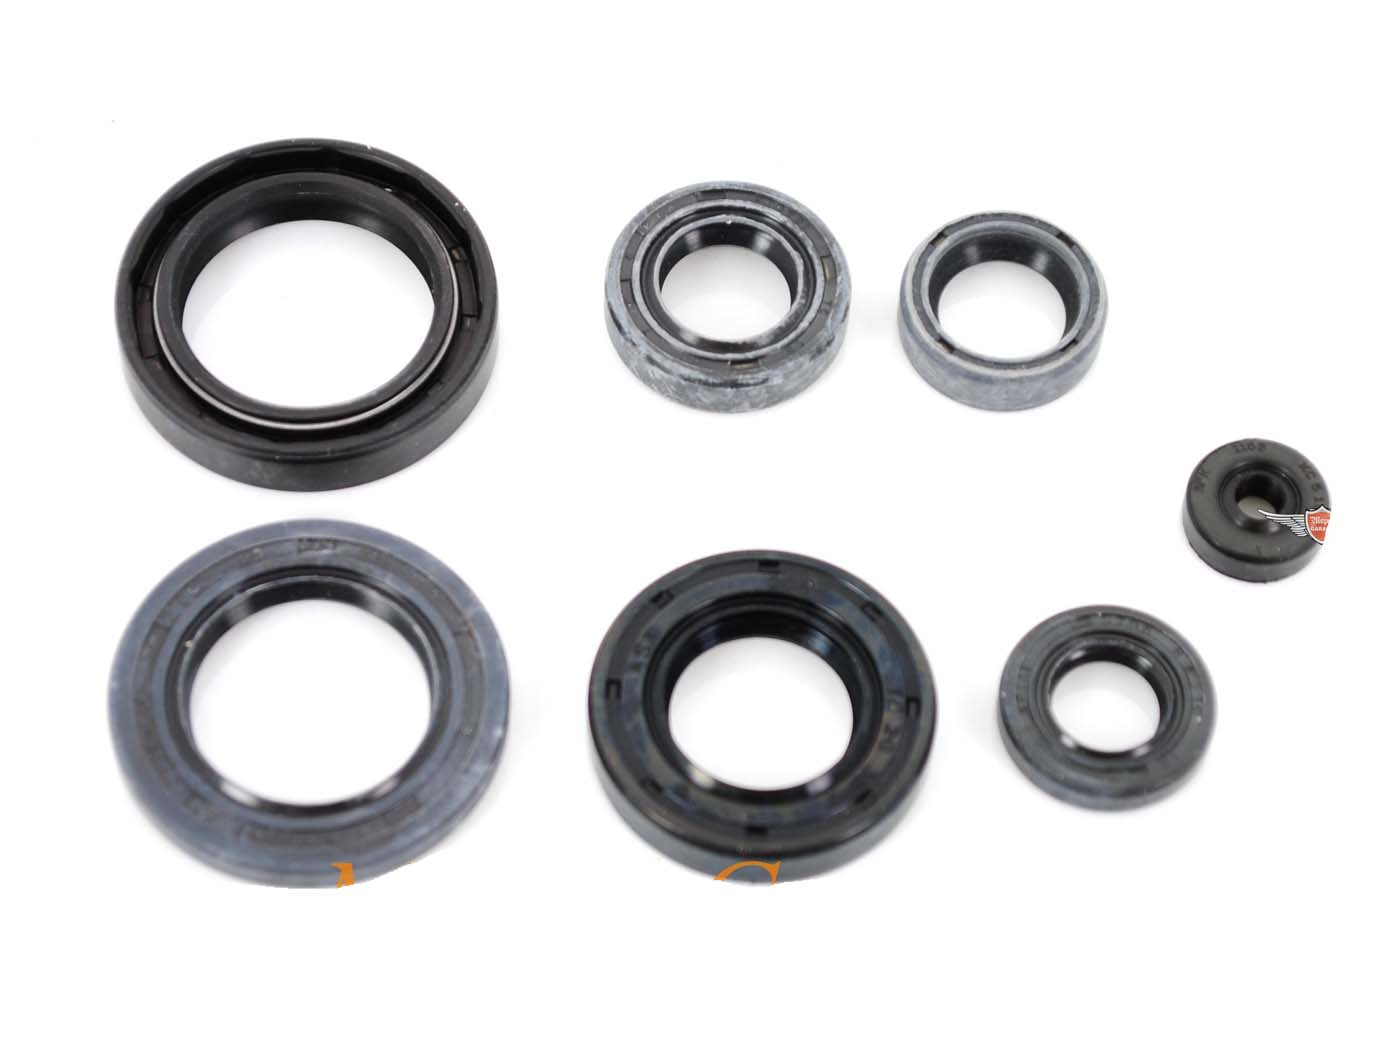 Engine Oil Seal 7 Pieces For Yamaha DT 50 MX, RD 50, TW, TY